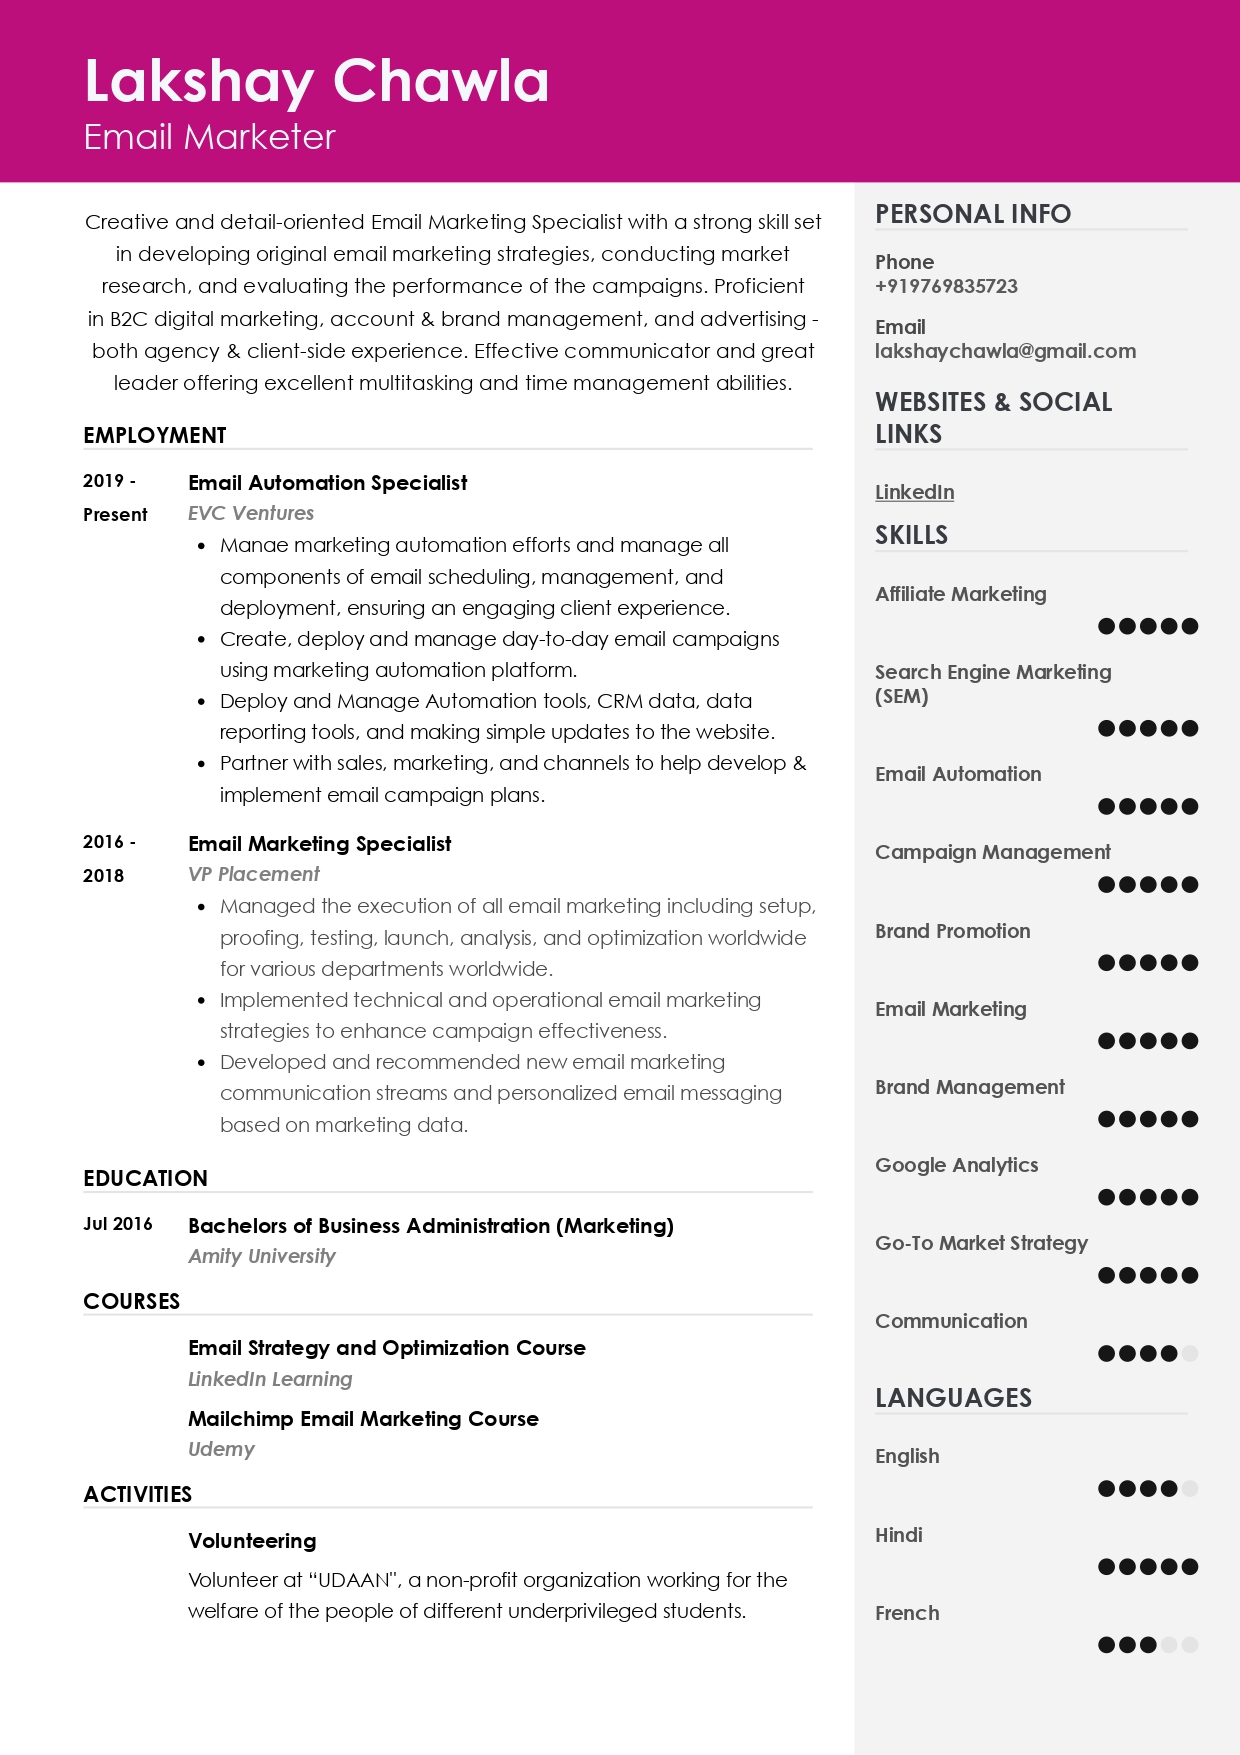 Sample Resume of Email Marketer | Free Resume Templates & Samples on Resumod.co